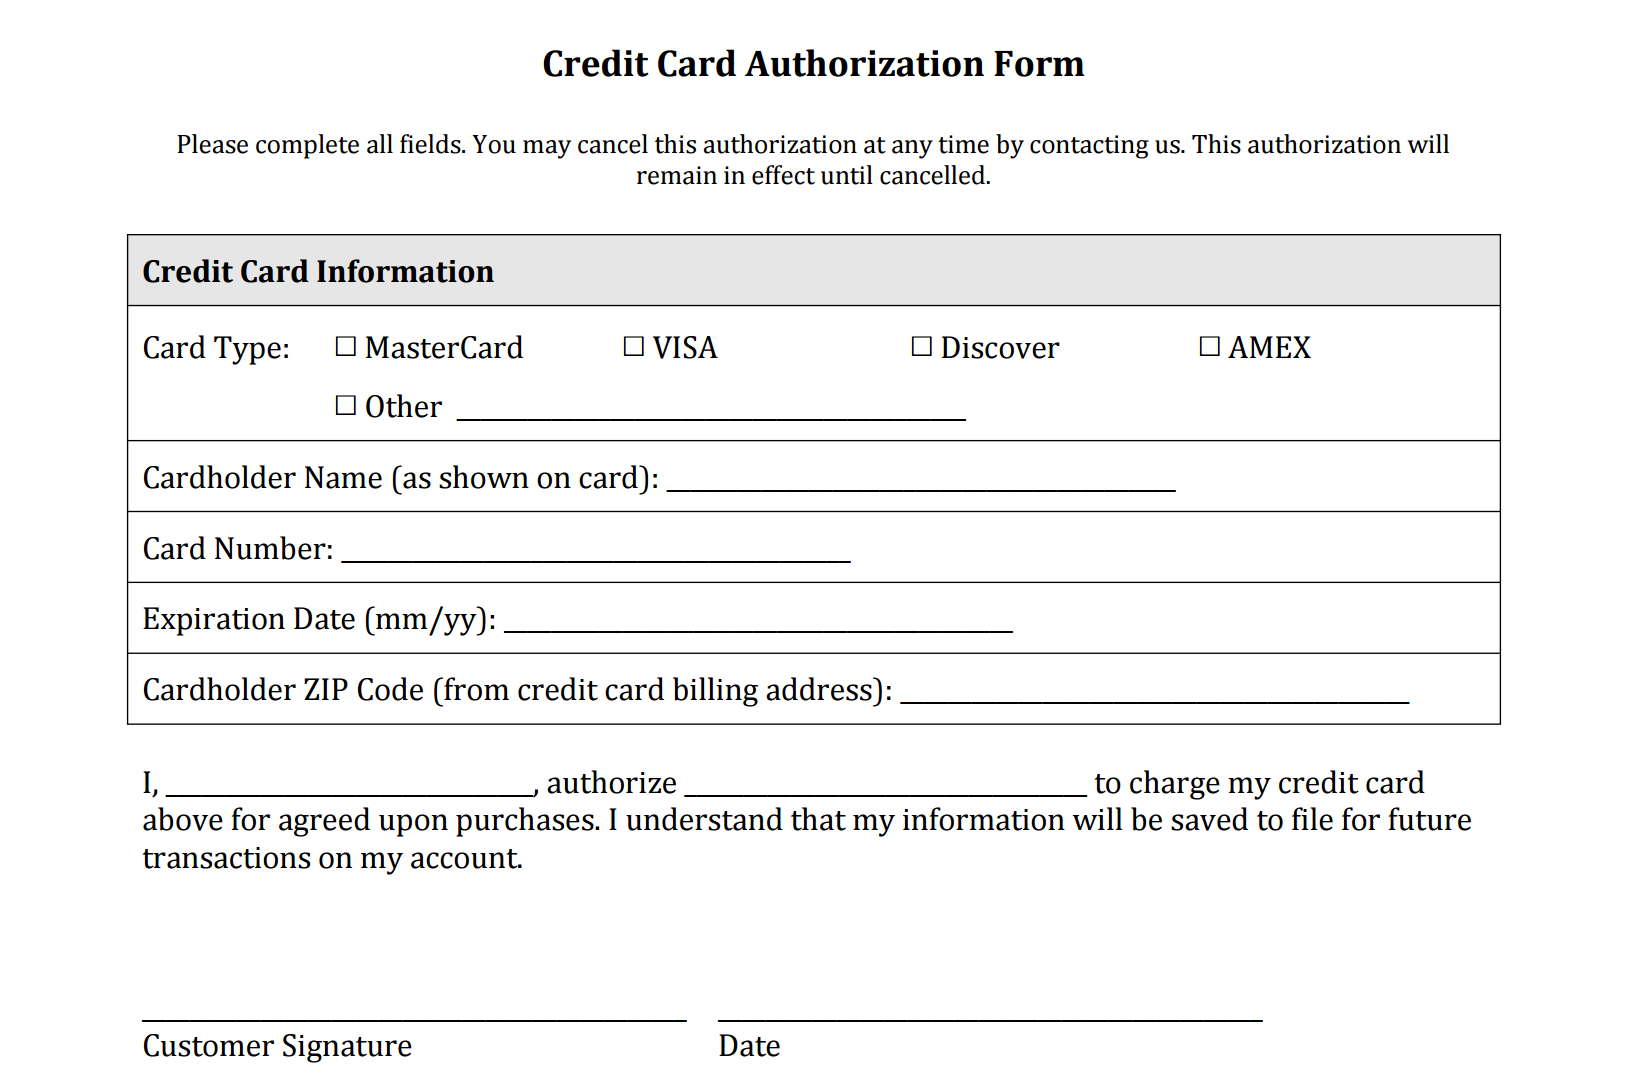 Credit Card Authorization Form Templates Download throughout Customer Information Card Template